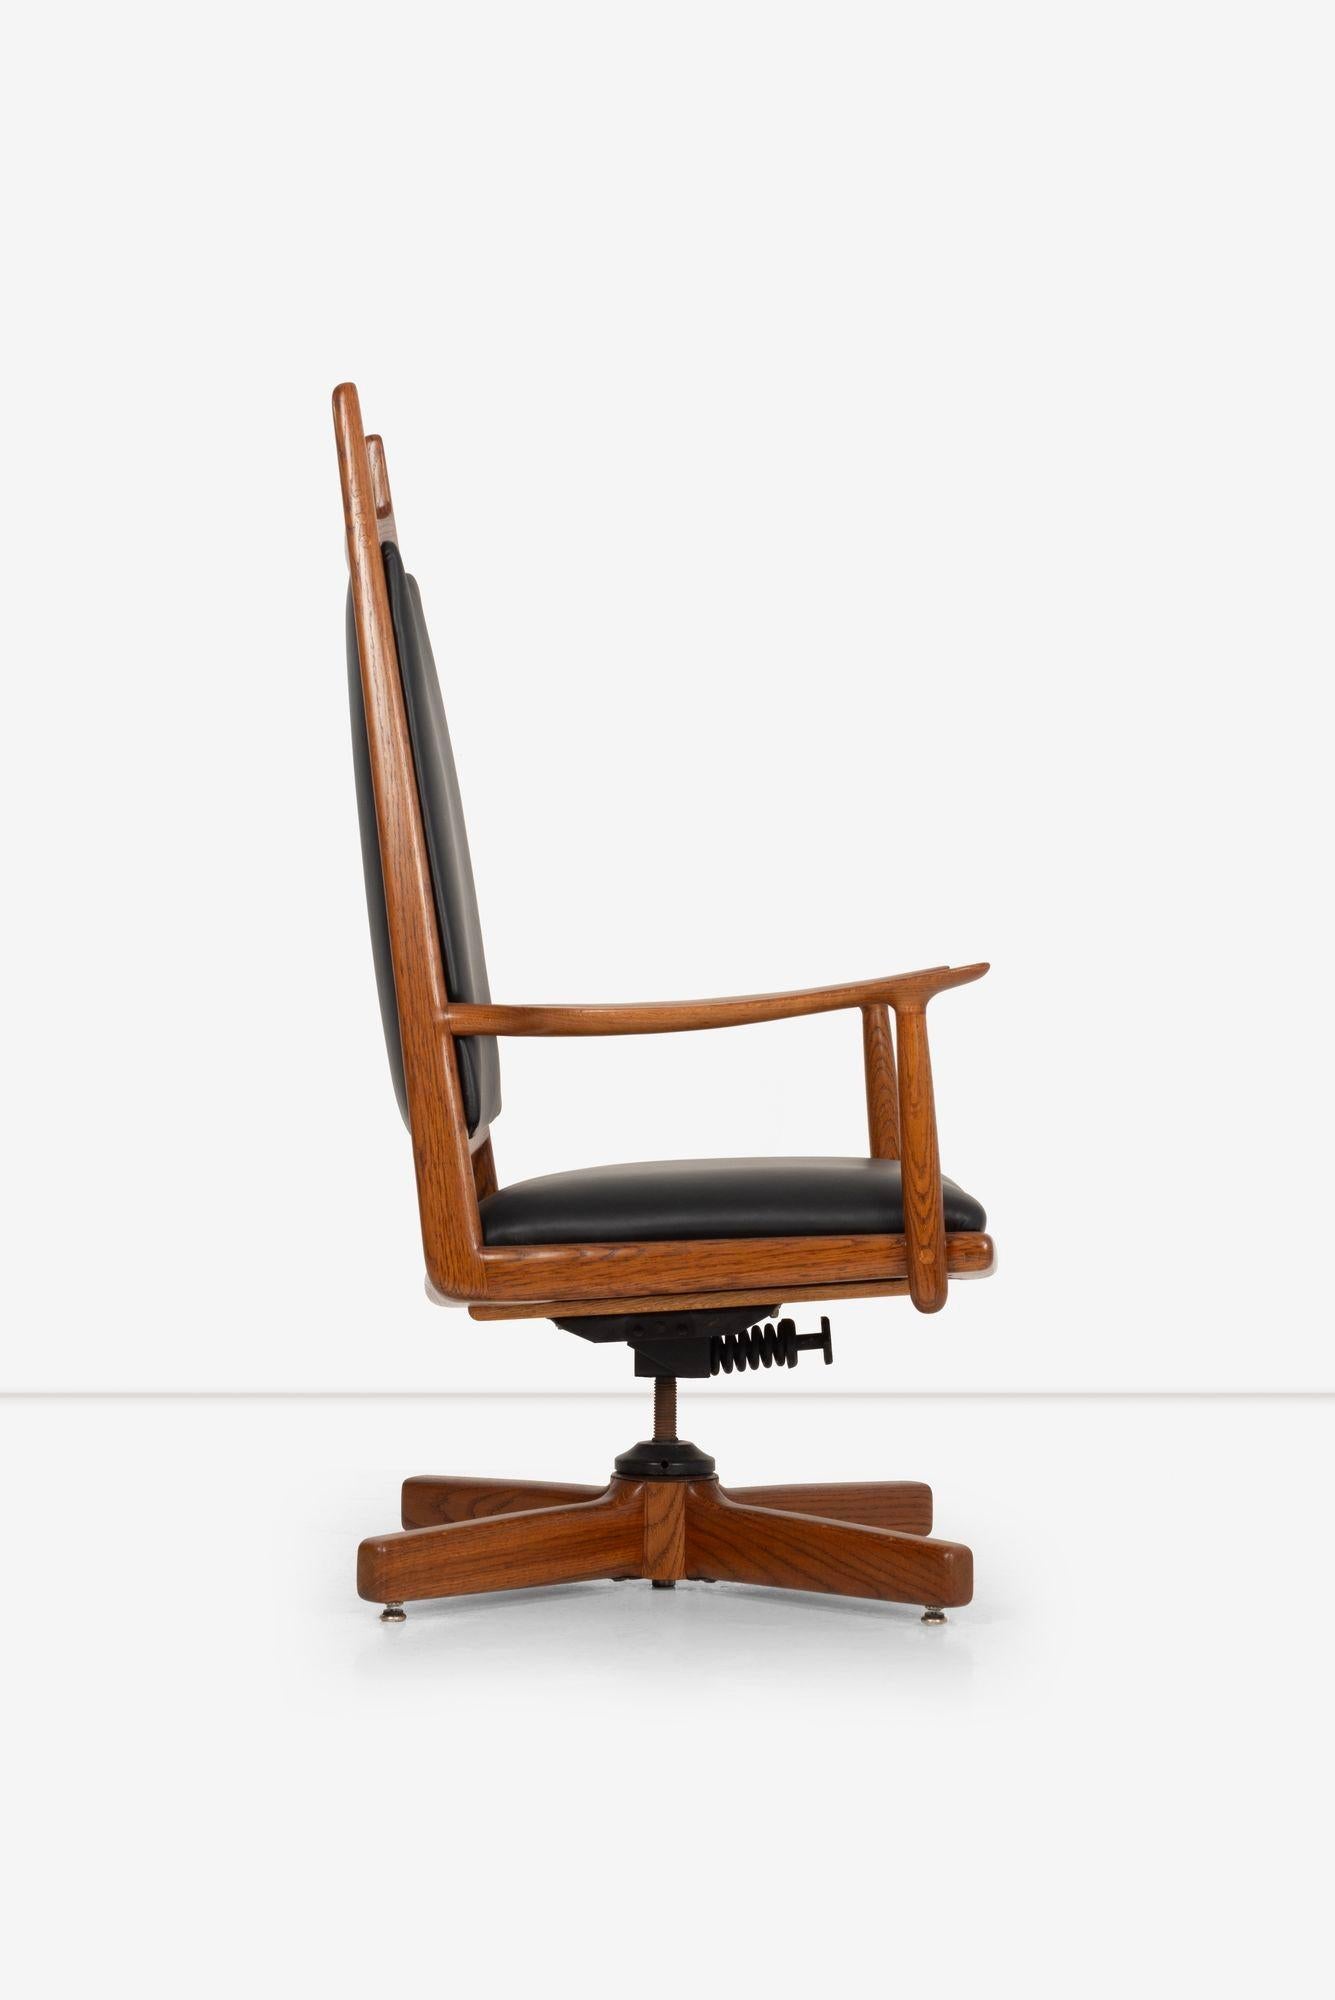 Late 20th Century Sam Maloof Highback Horned Desk Chair For Sale